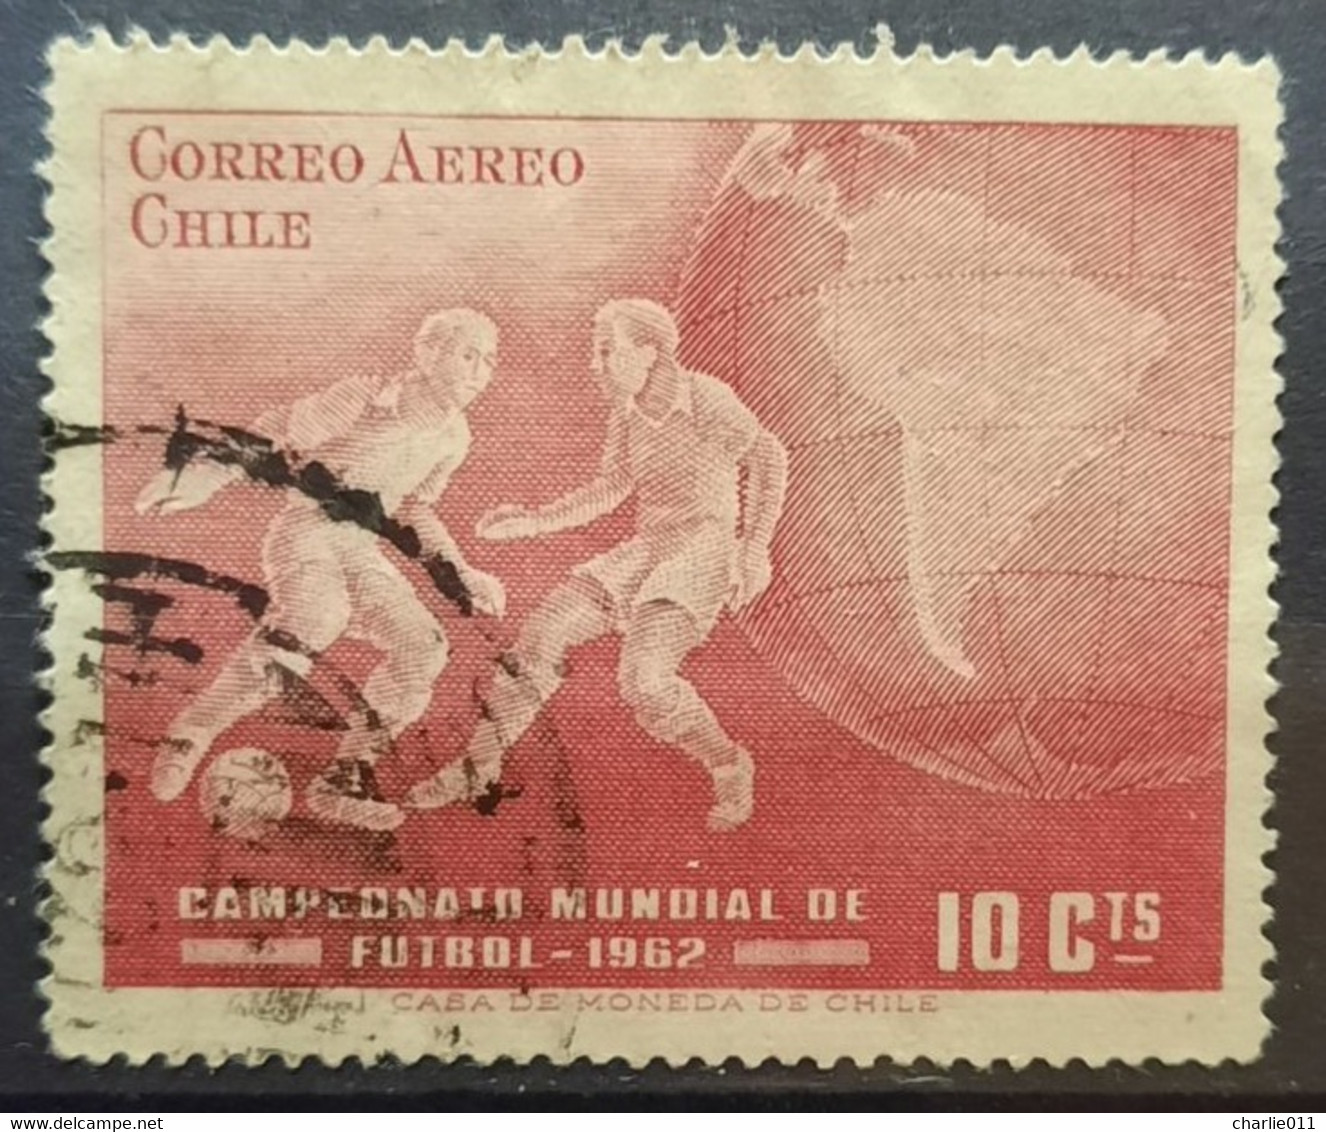 FOOTBALL-10 C -AIRMAIL-WORLD CHAMPIONSHIP-CHILE-1962 - 1962 – Cile